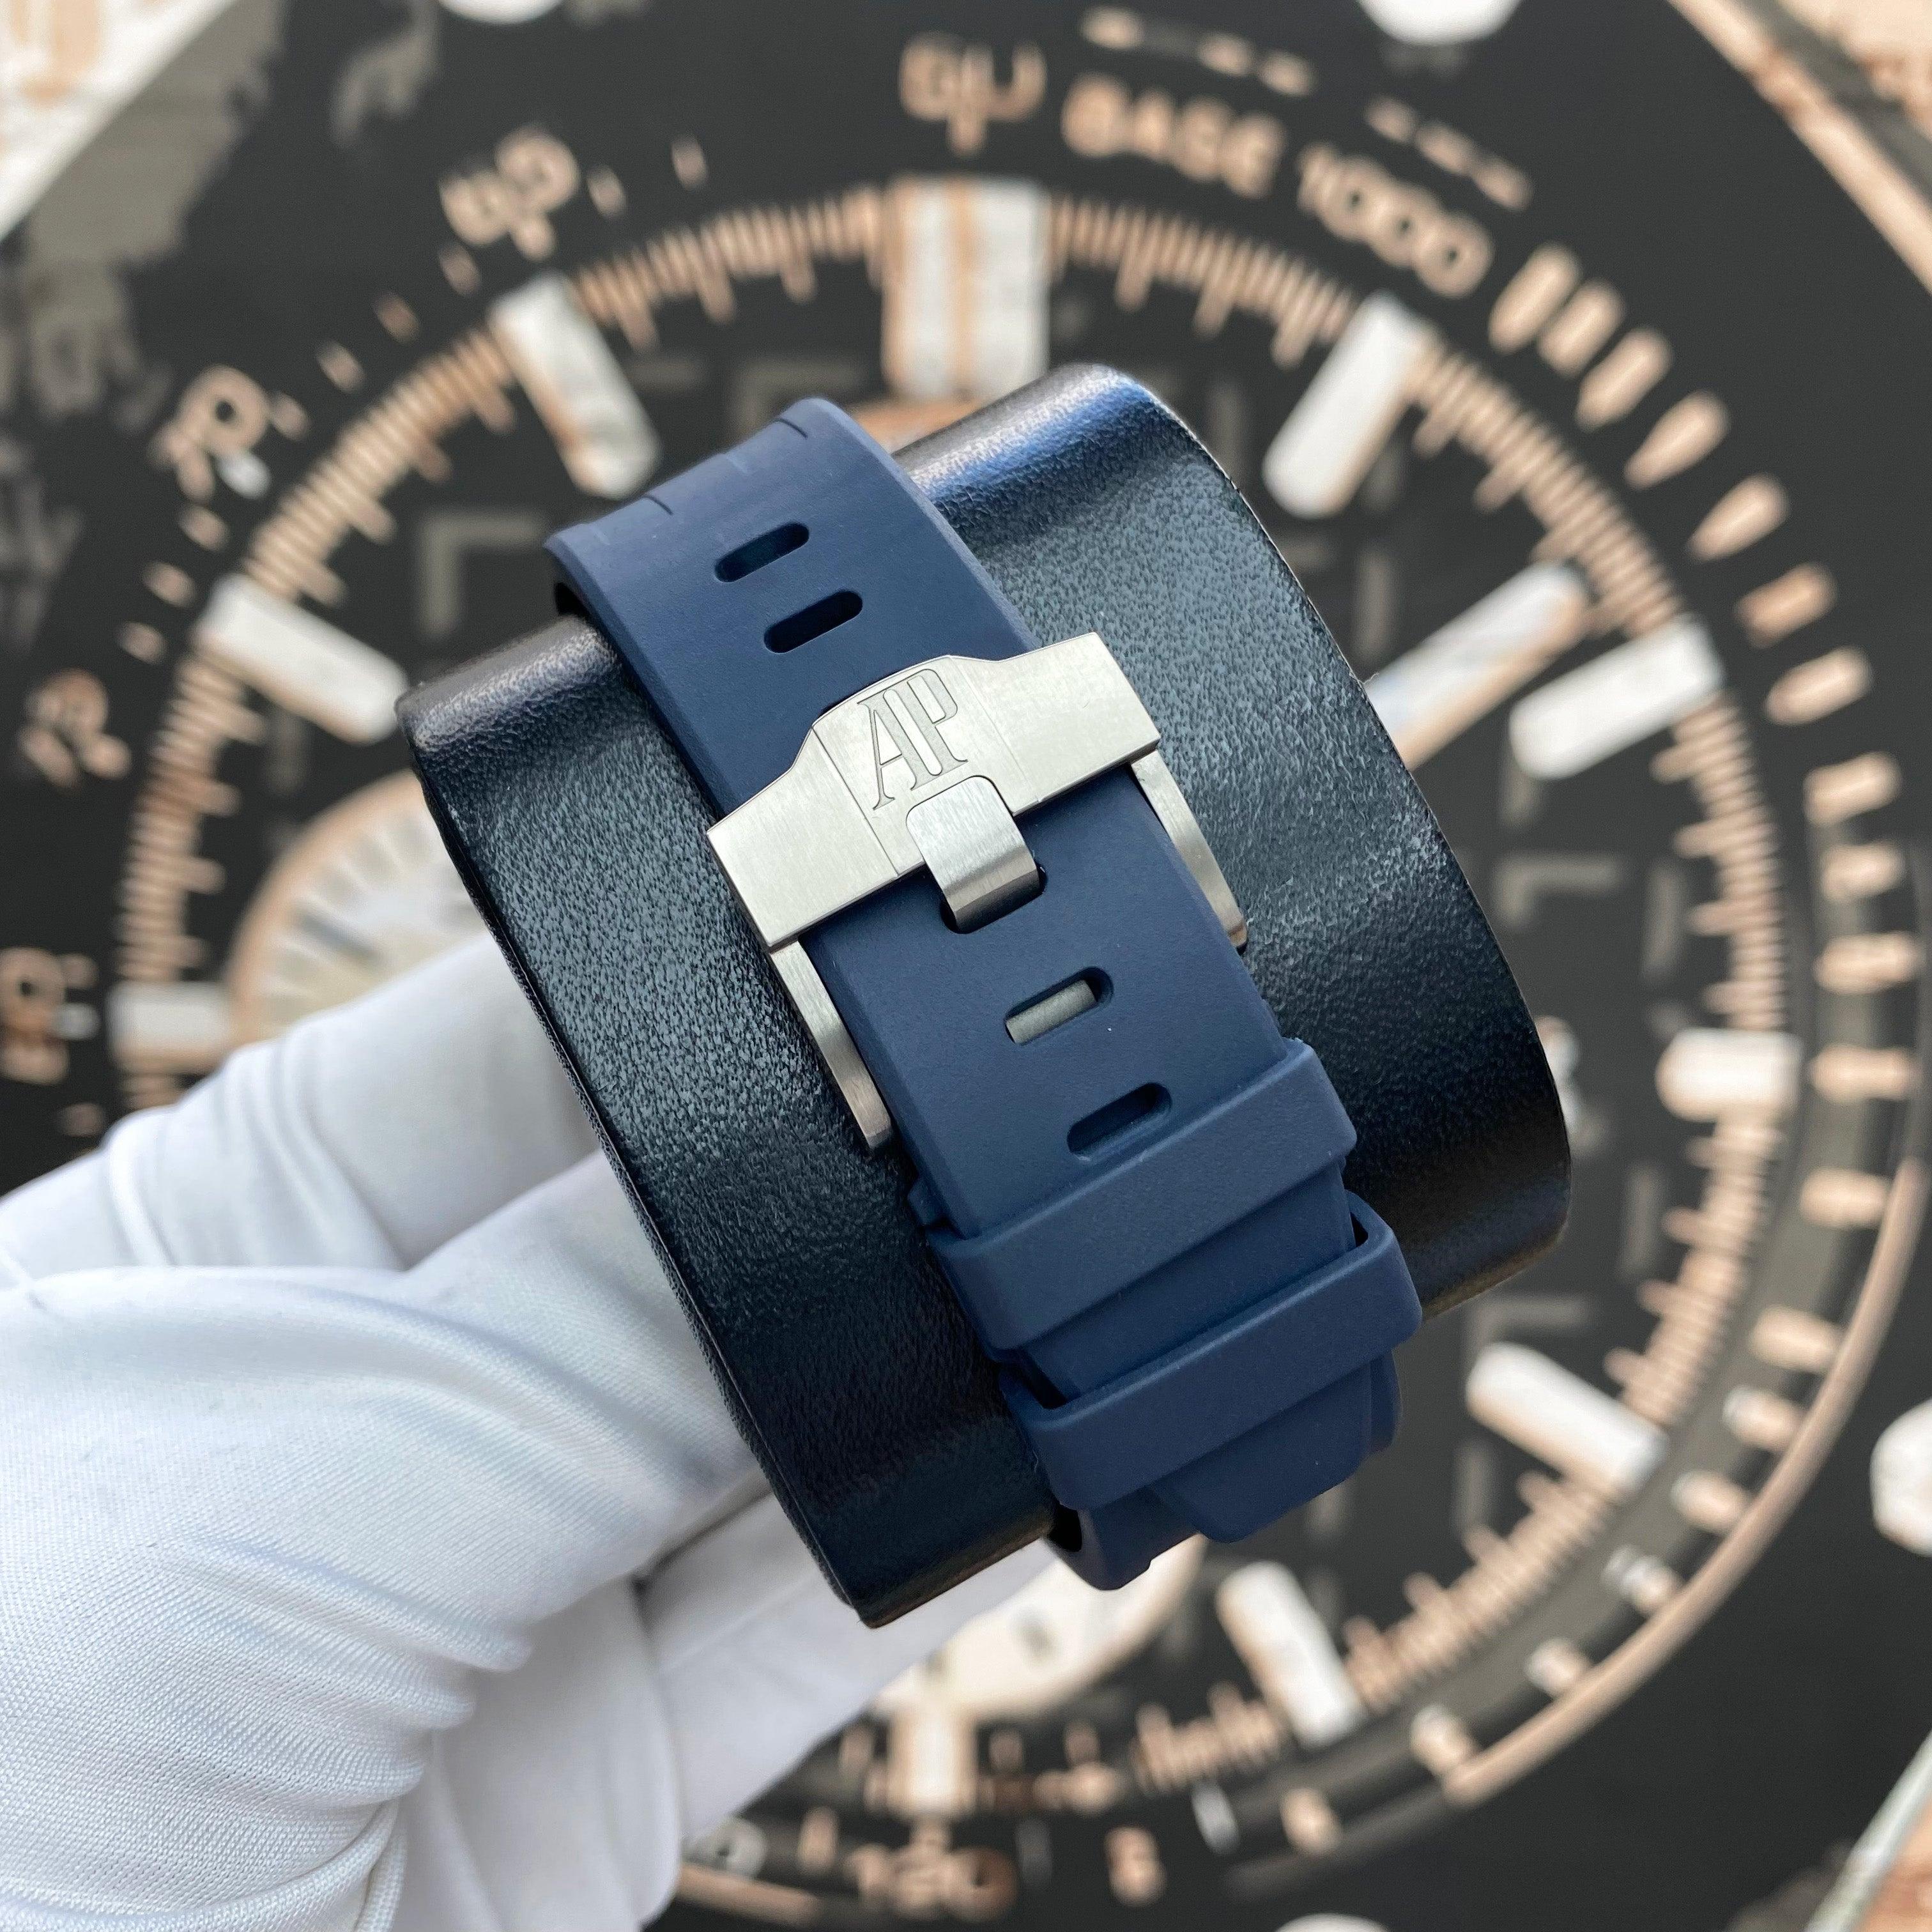 Audemars Piguet Royal Oak Offshore Chronograph 42mm 26480TI.OO.A027CA.01 Blue Dial Pre-Owned - Gotham Trading 